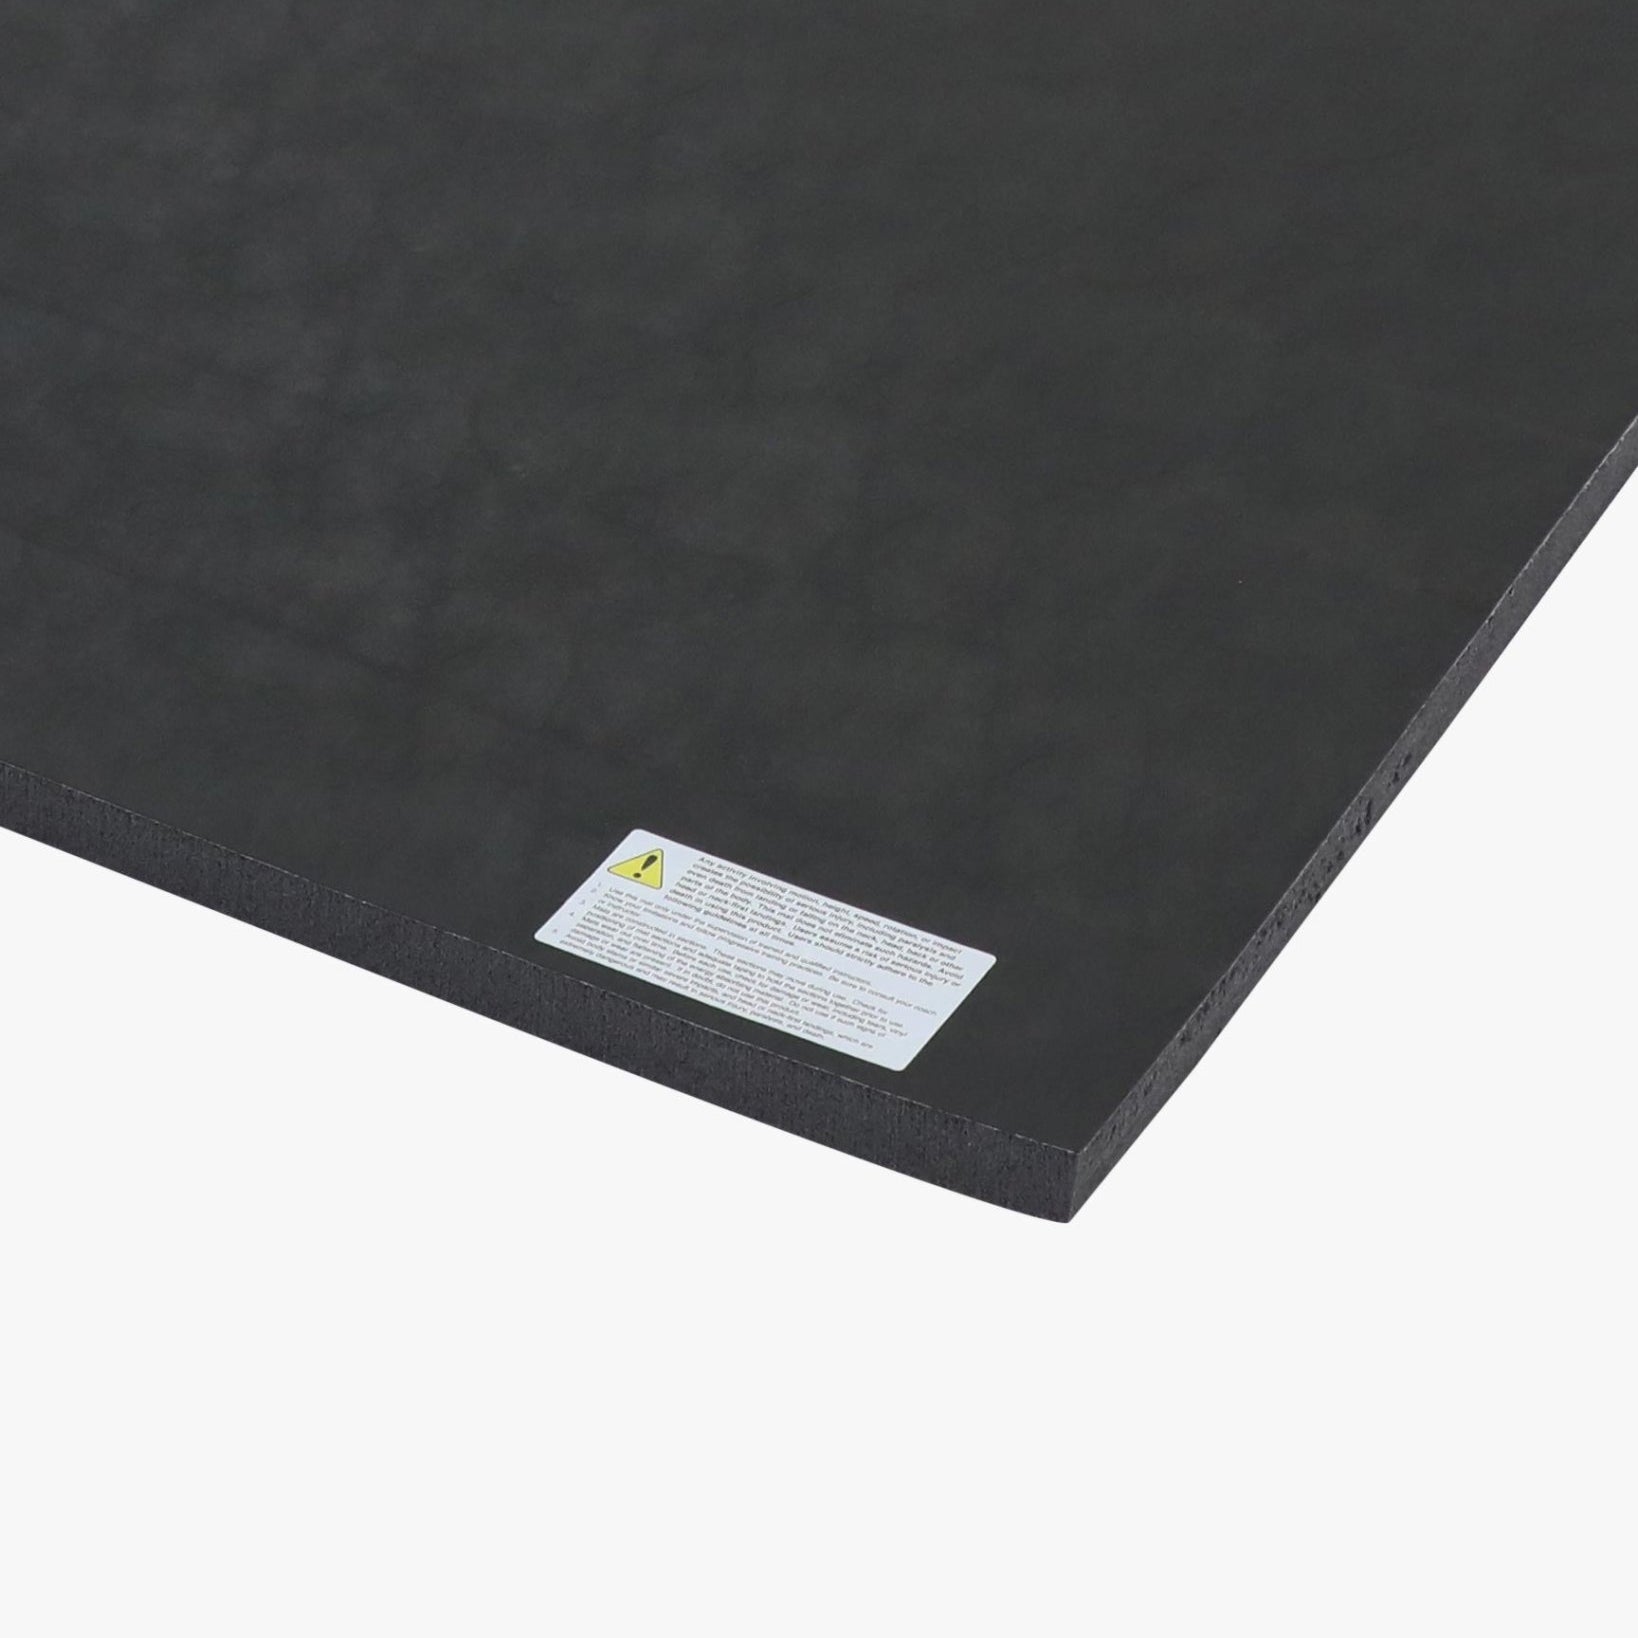 Custom Rollout Mat - 1.25" Thick